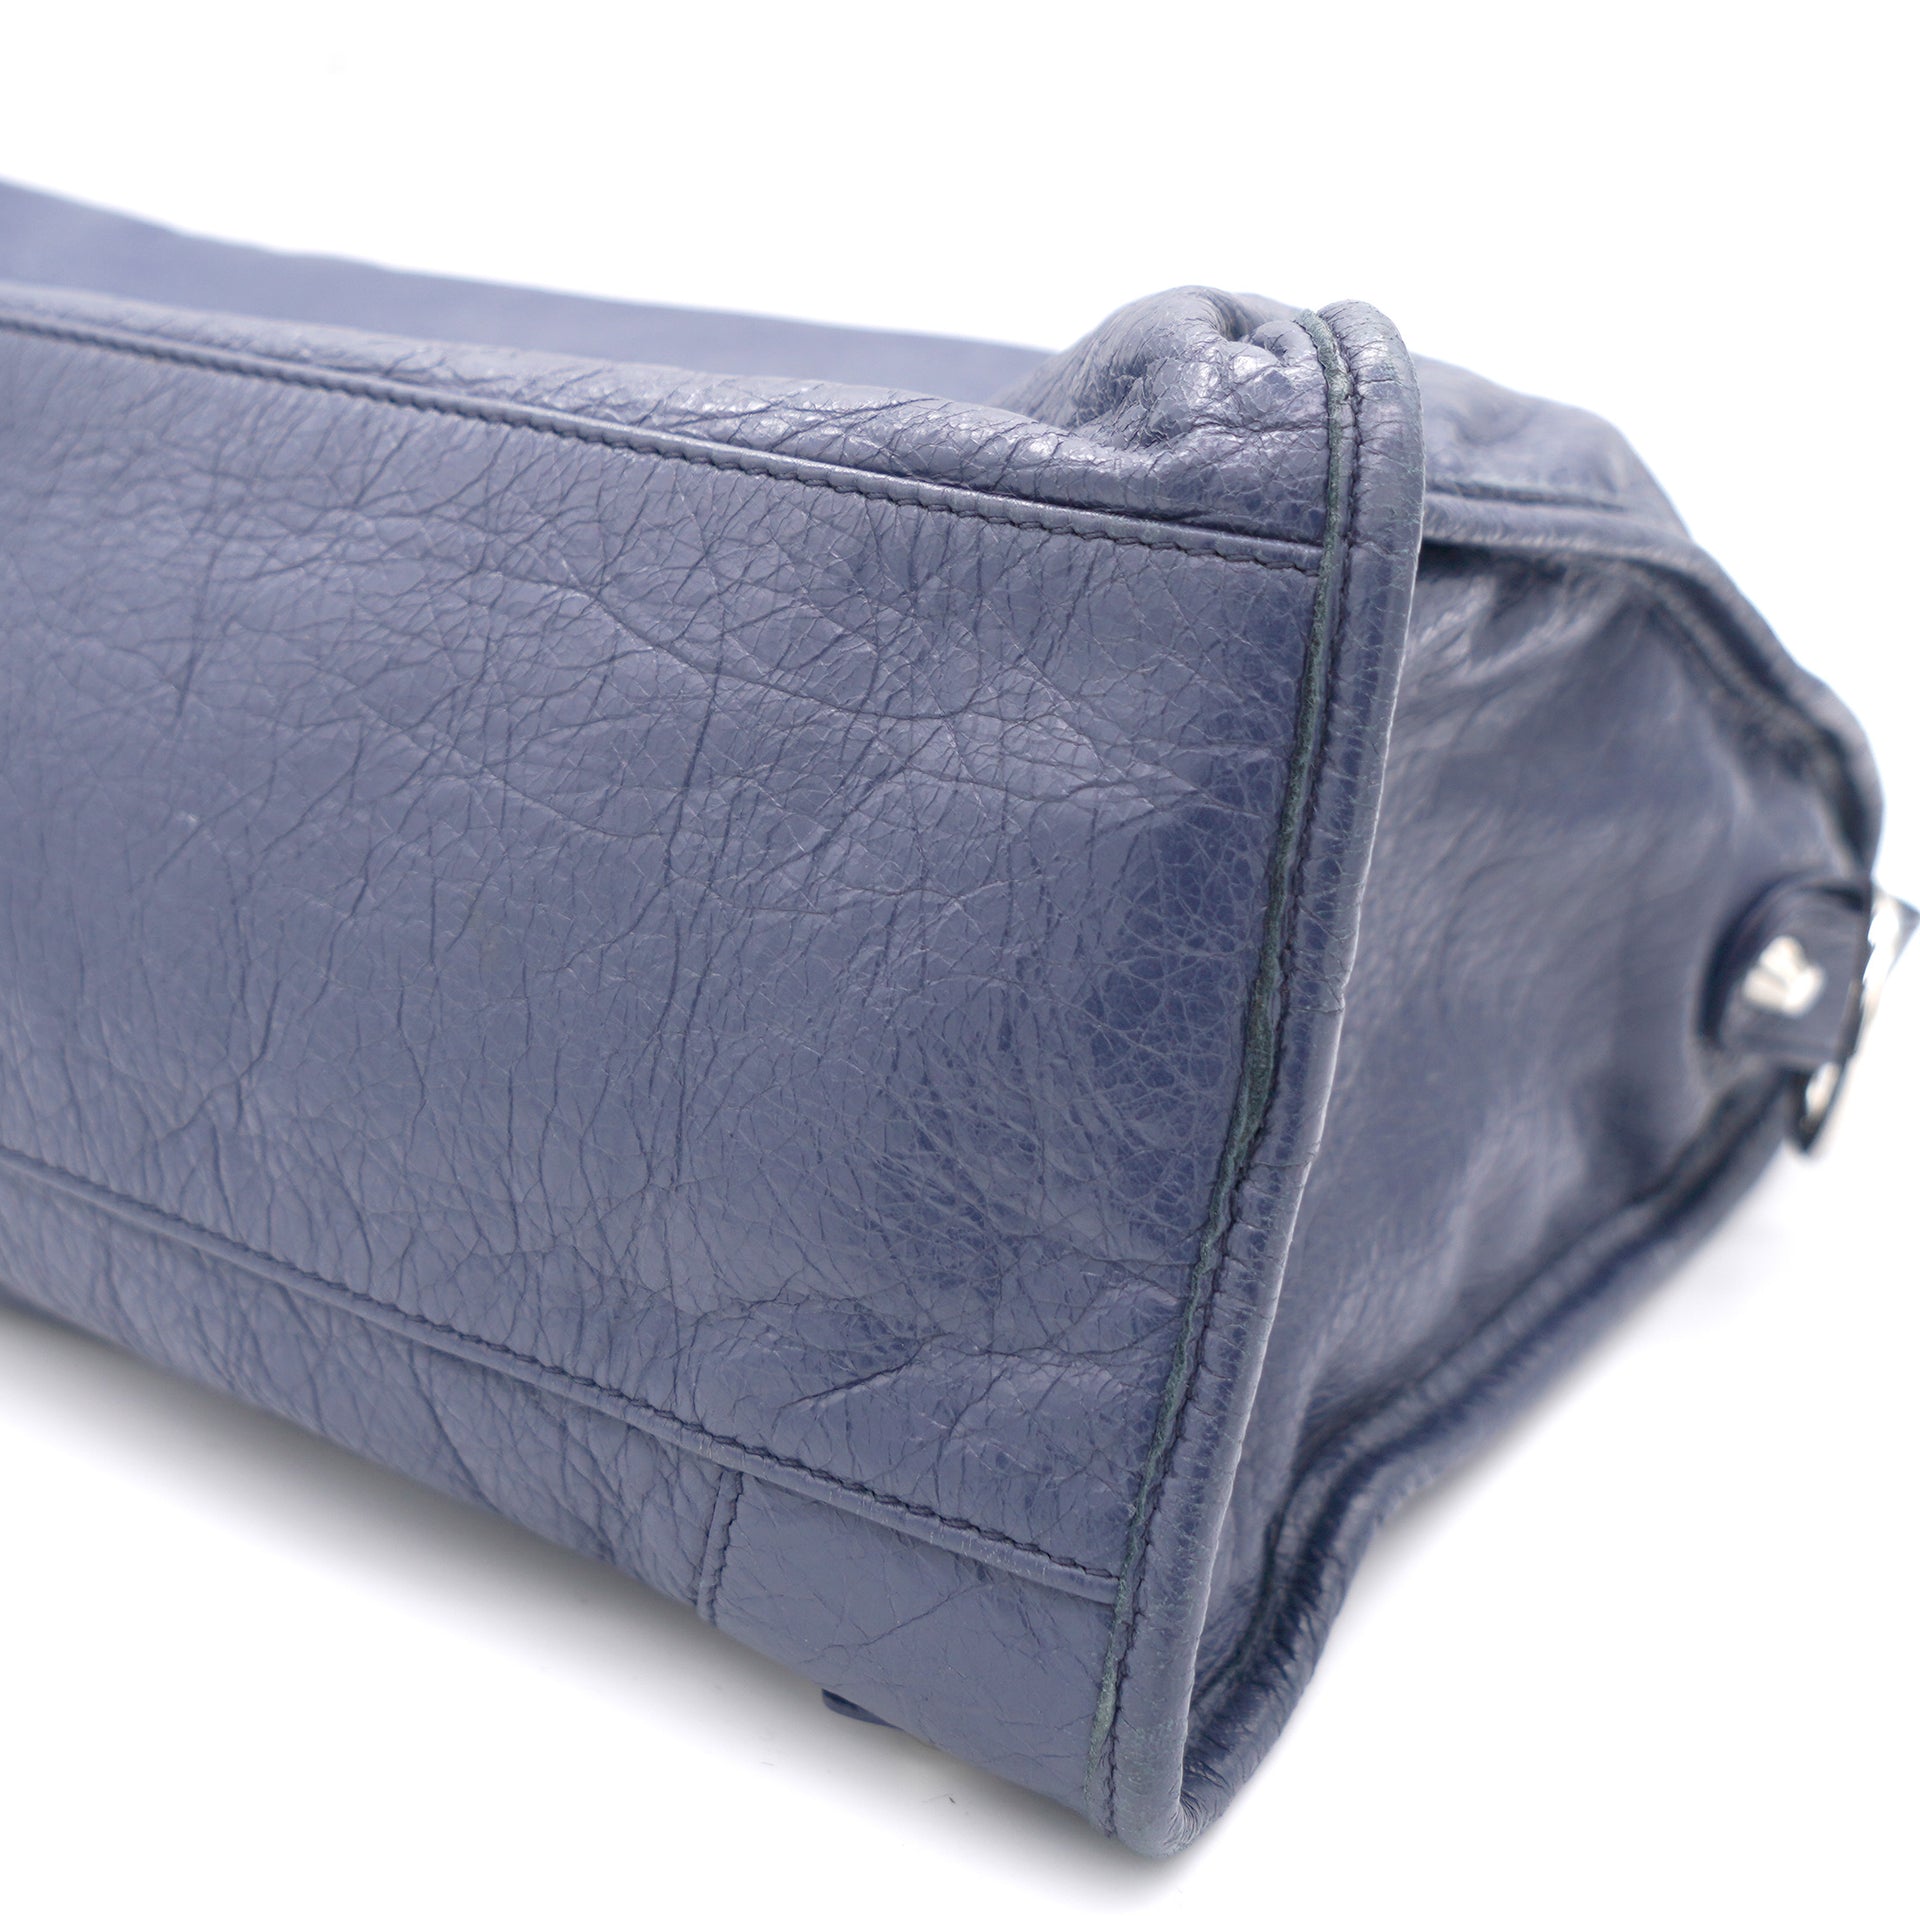 Blue Lambskin Leather Motorcycle City Bag